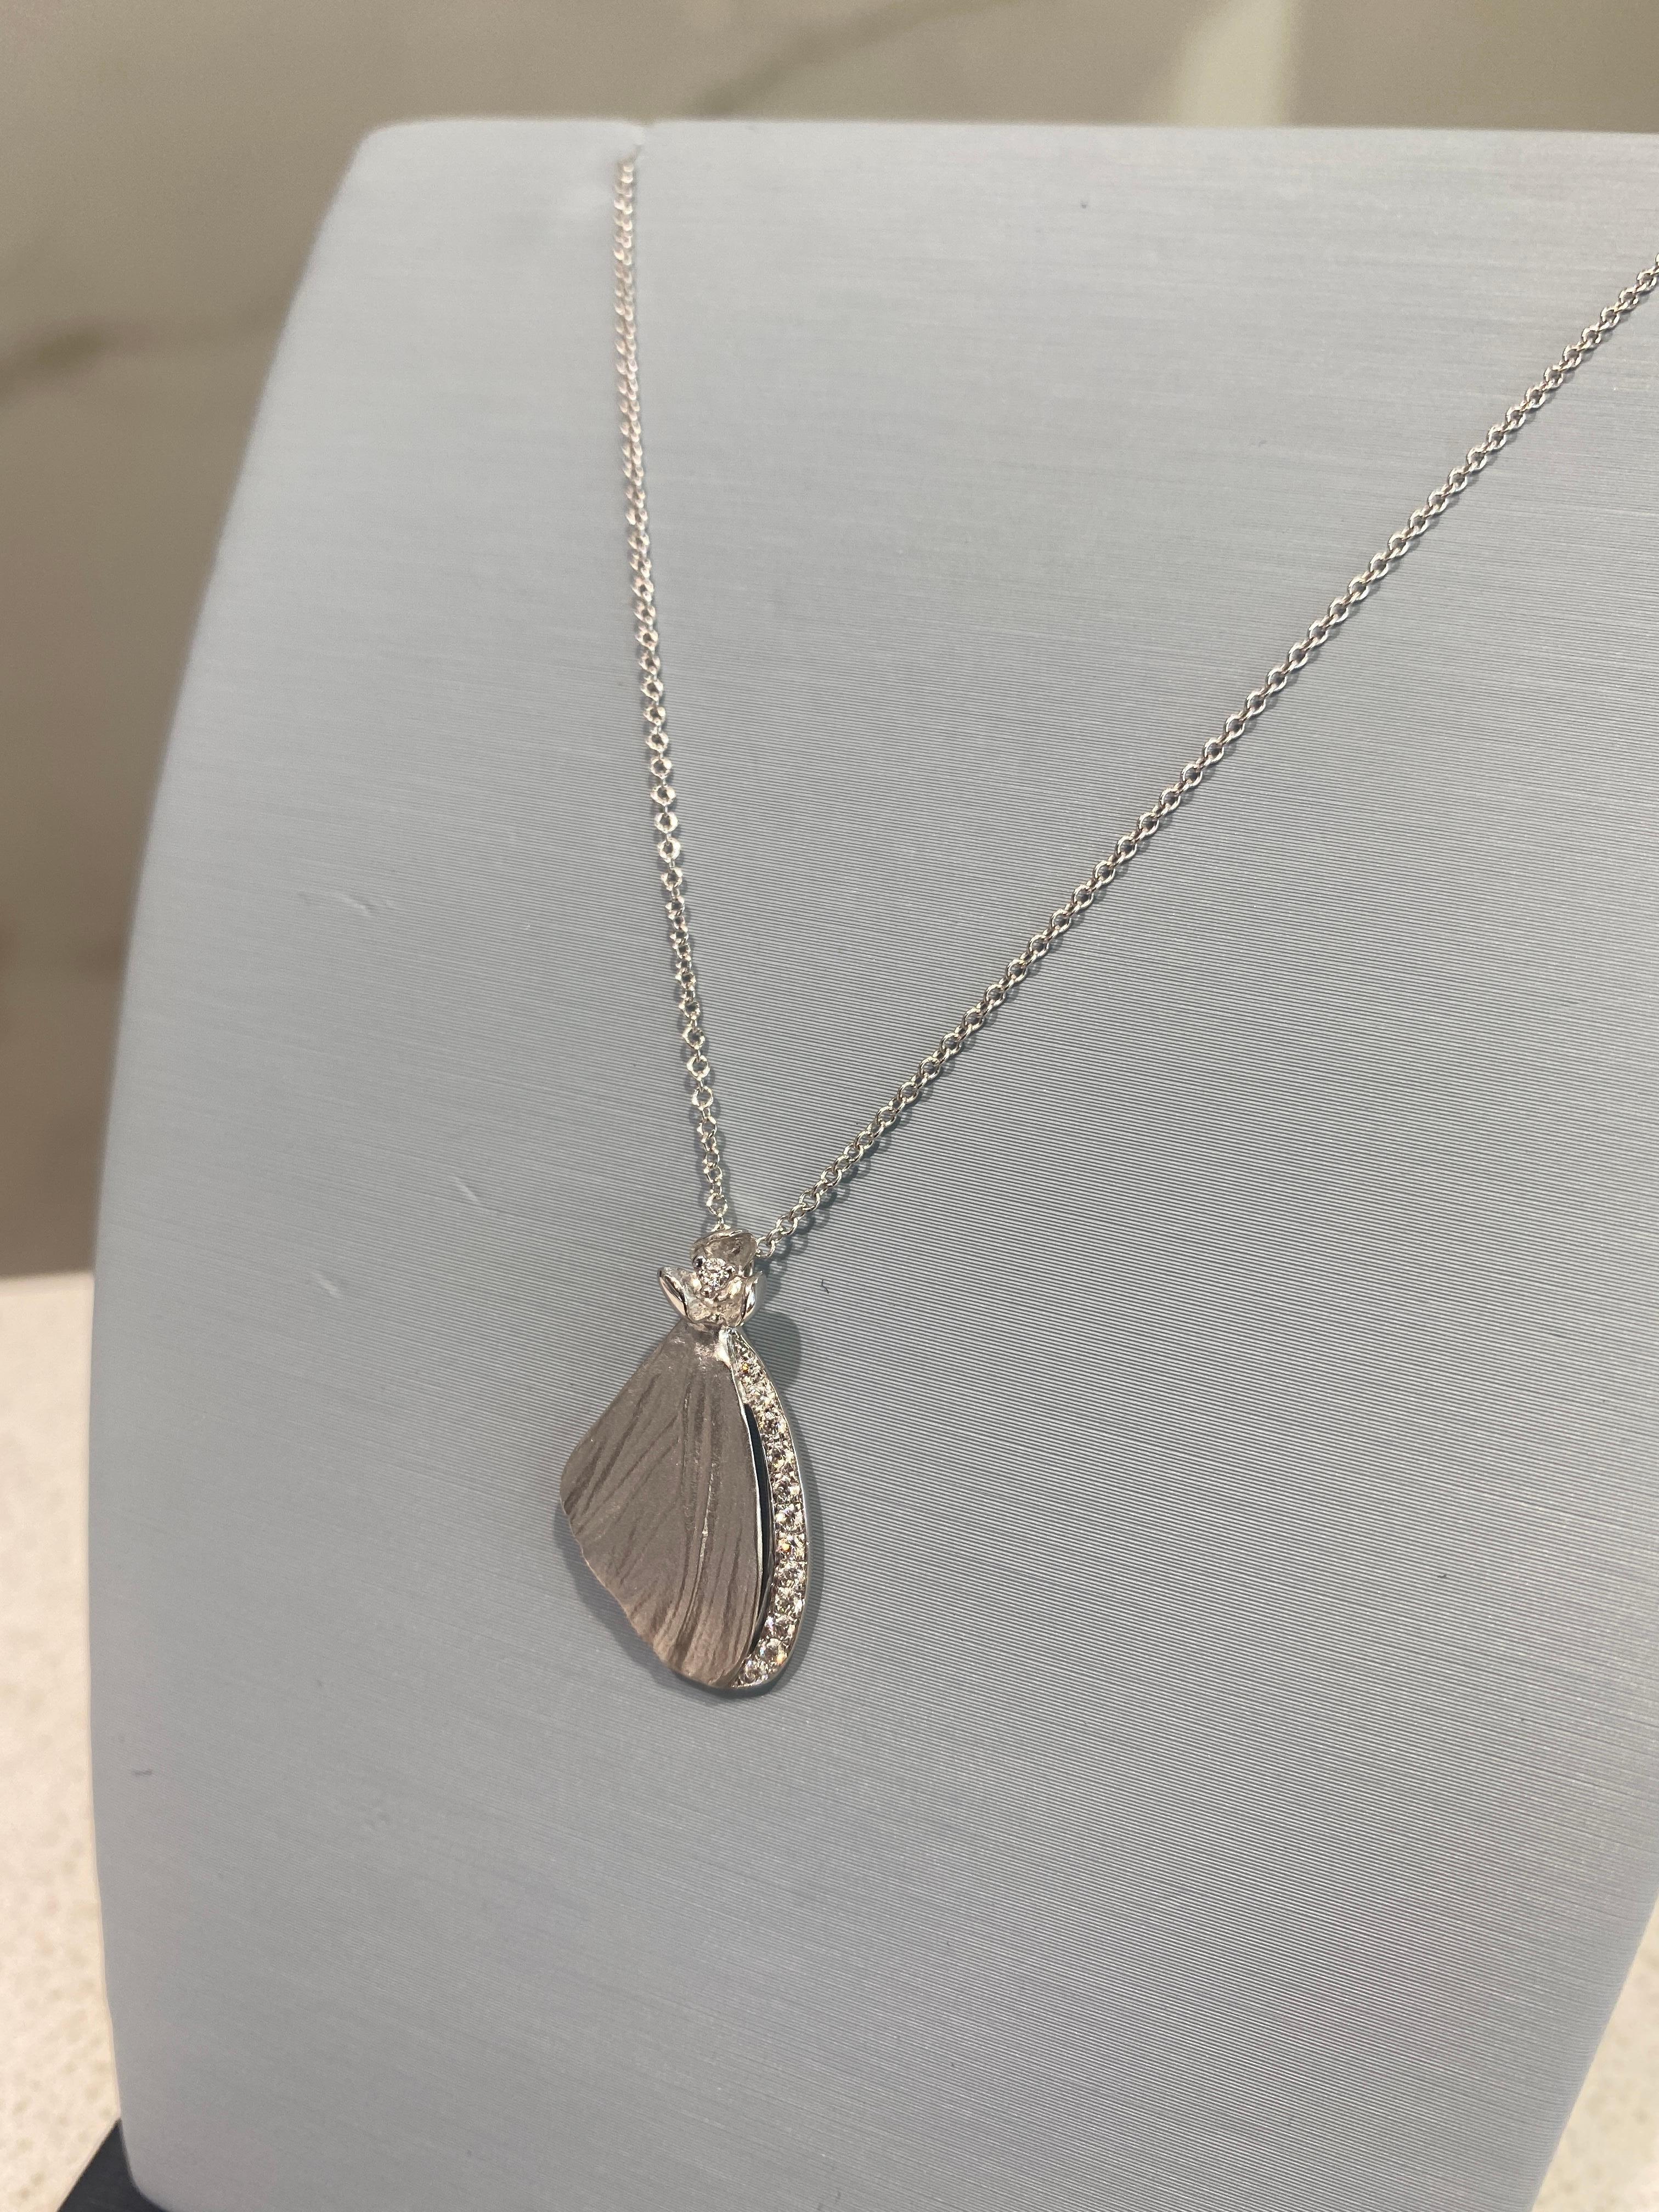 This unique pendant necklace from Simon G. features a delicate butterfly's wing crafted in 18 karat white gold and accented by a row of 0.11 carat total weight in round brilliant cut diamonds. It is set on an 18 karat white gold 18